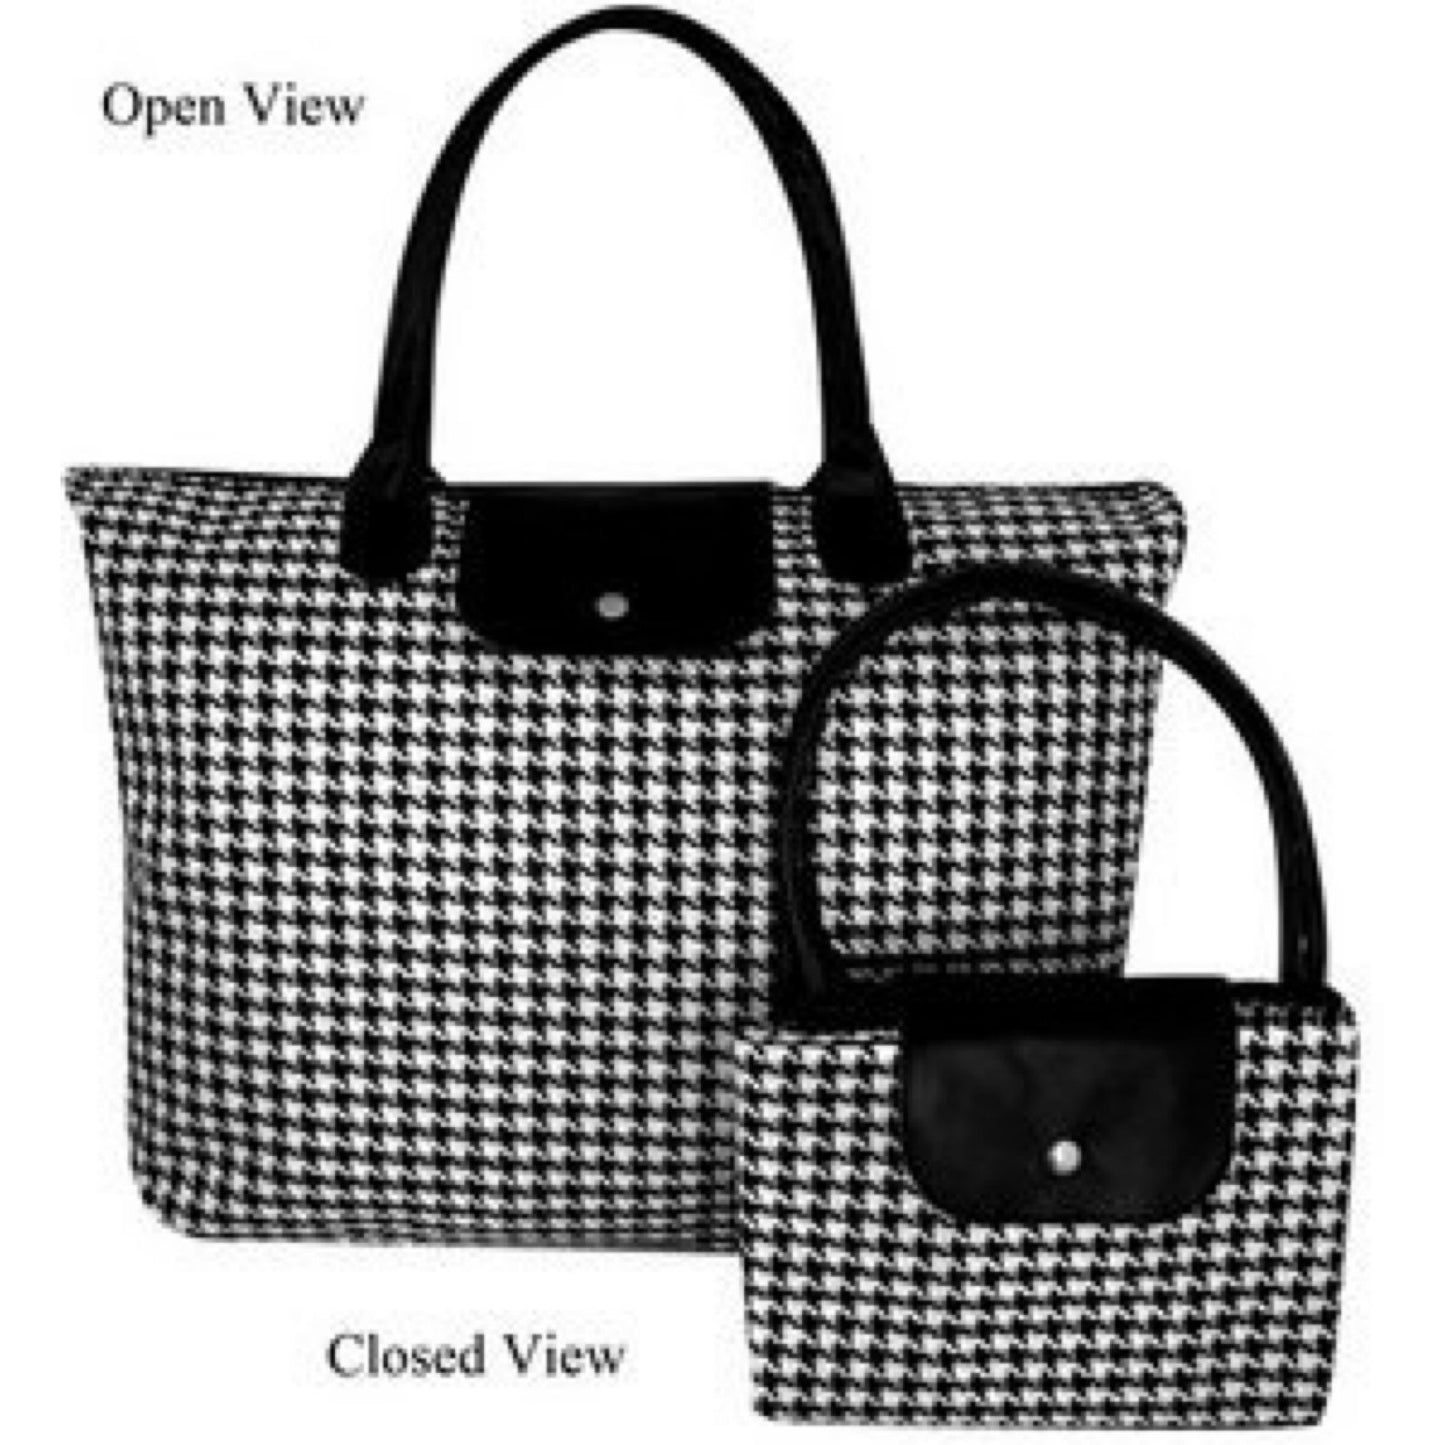 New Large foldable houndstooth tote